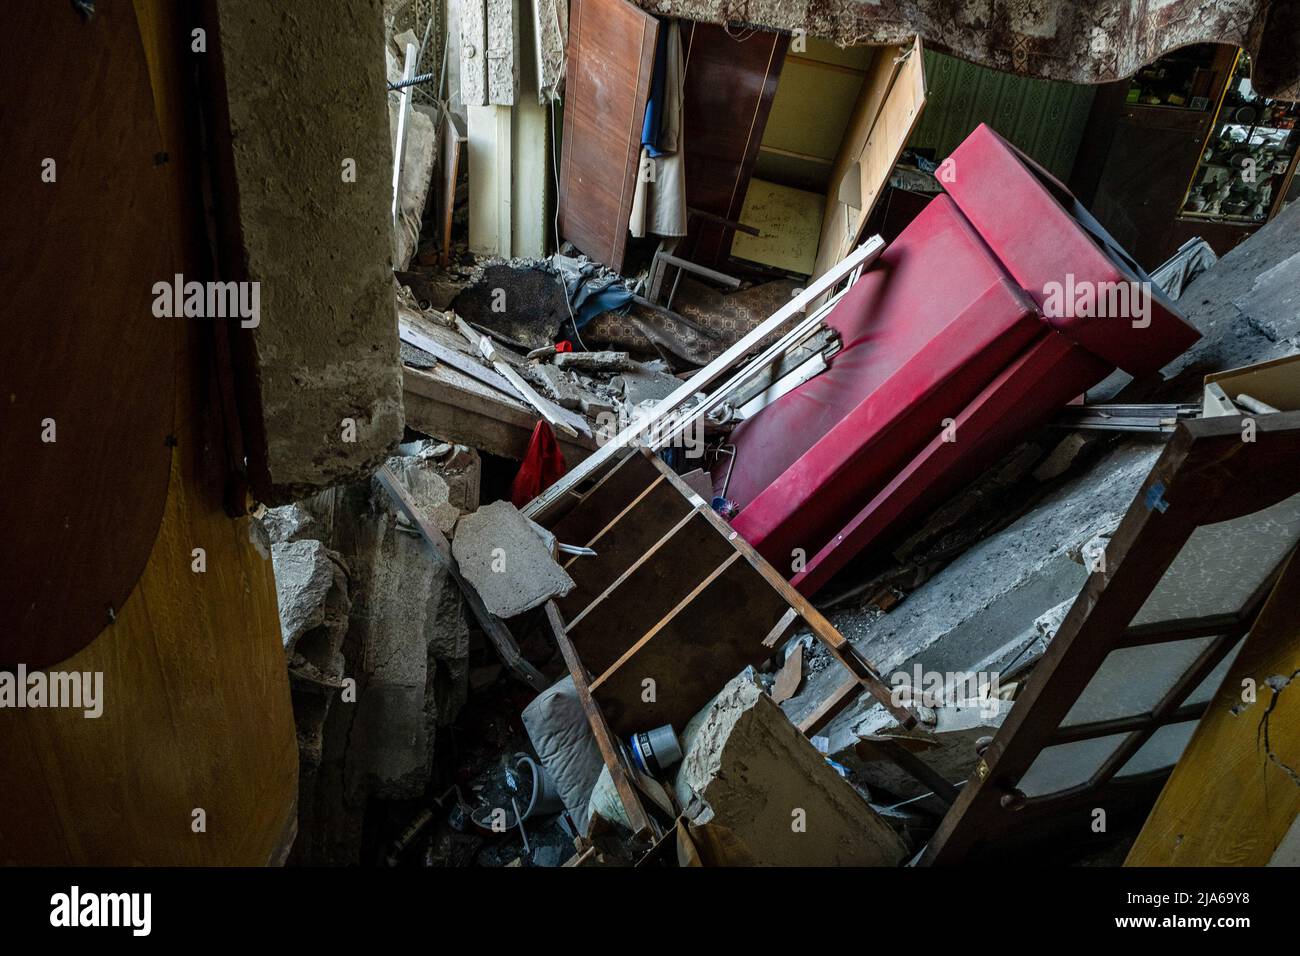 Bakhmut, Ukraine. 24th May, 2022. An interior view of the ruins from a residential building in Bakhmut, Donbas. As Bakhmut stands as a key city to Ukrainian forces in defending Donetsk(Donbas) region, the city is under attack by the Russian troops. The Russian invasion of Ukraine started on February 24, the war that has killed numerous civilians and soldiers. Credit: SOPA Images Limited/Alamy Live News Stock Photo